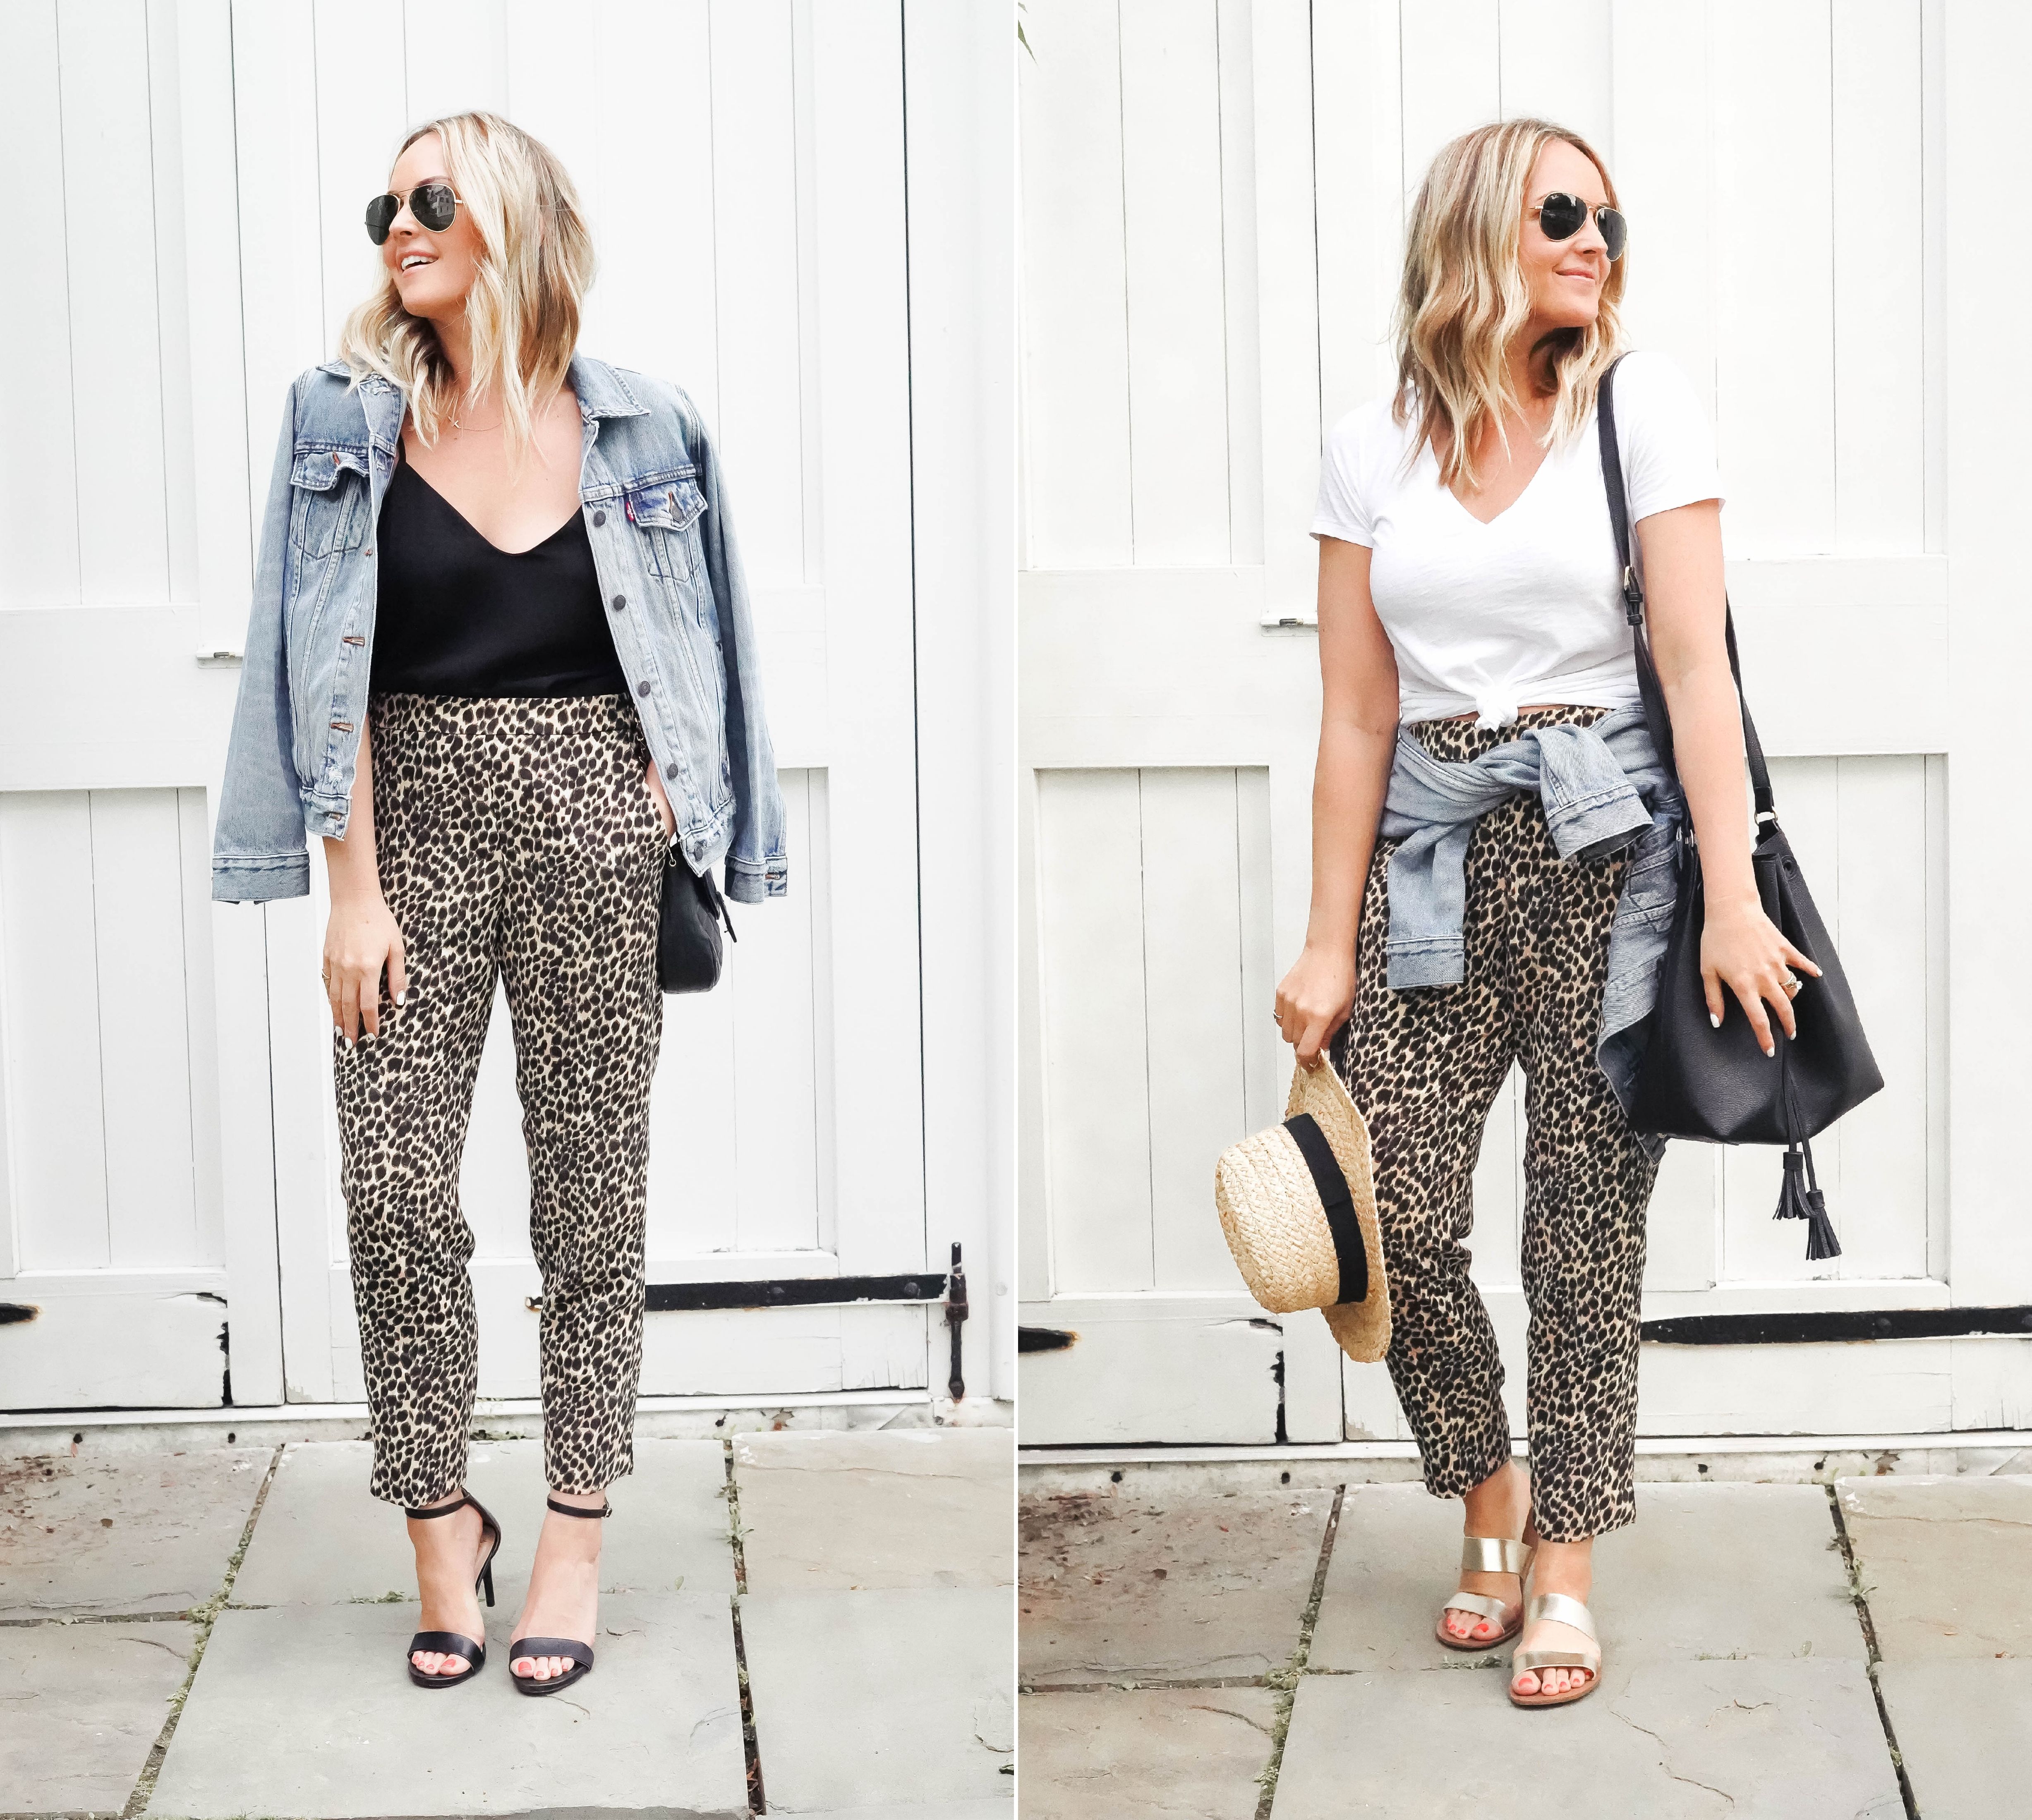 How to Style Print Pants